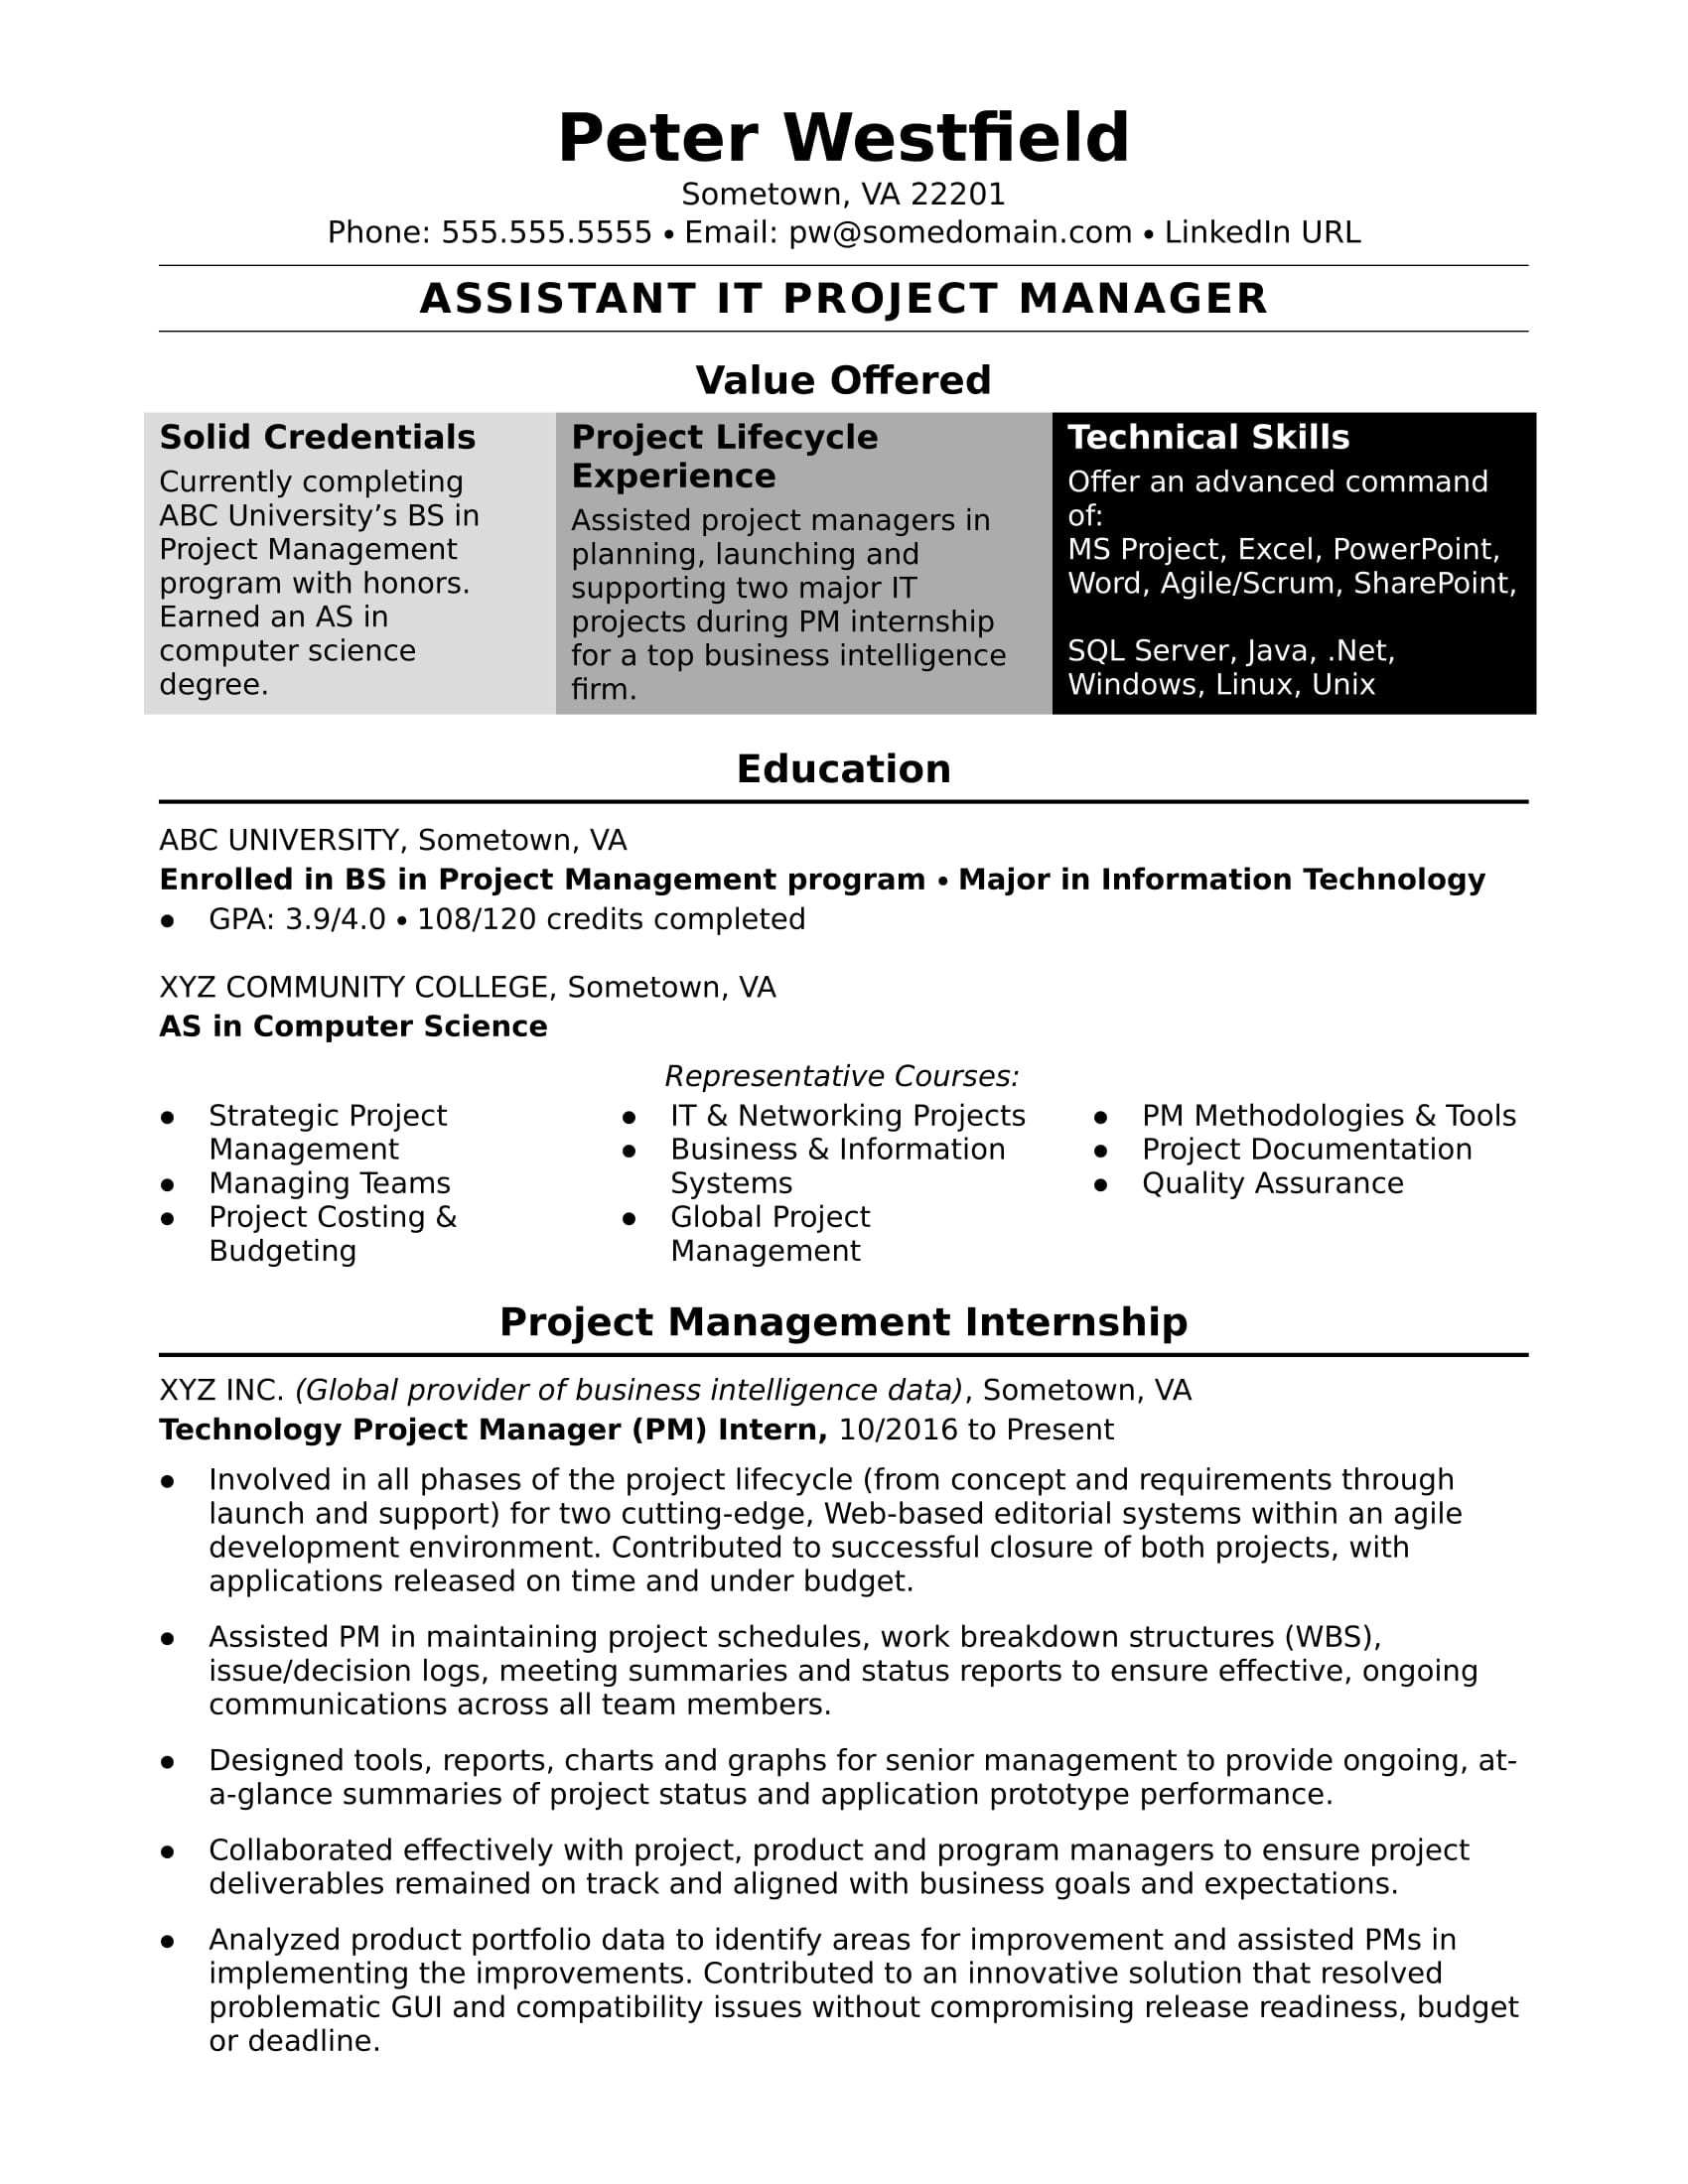 Net Technical Lead Resume Sample India Sample Resume for An assistant It Project Manager Monster.com